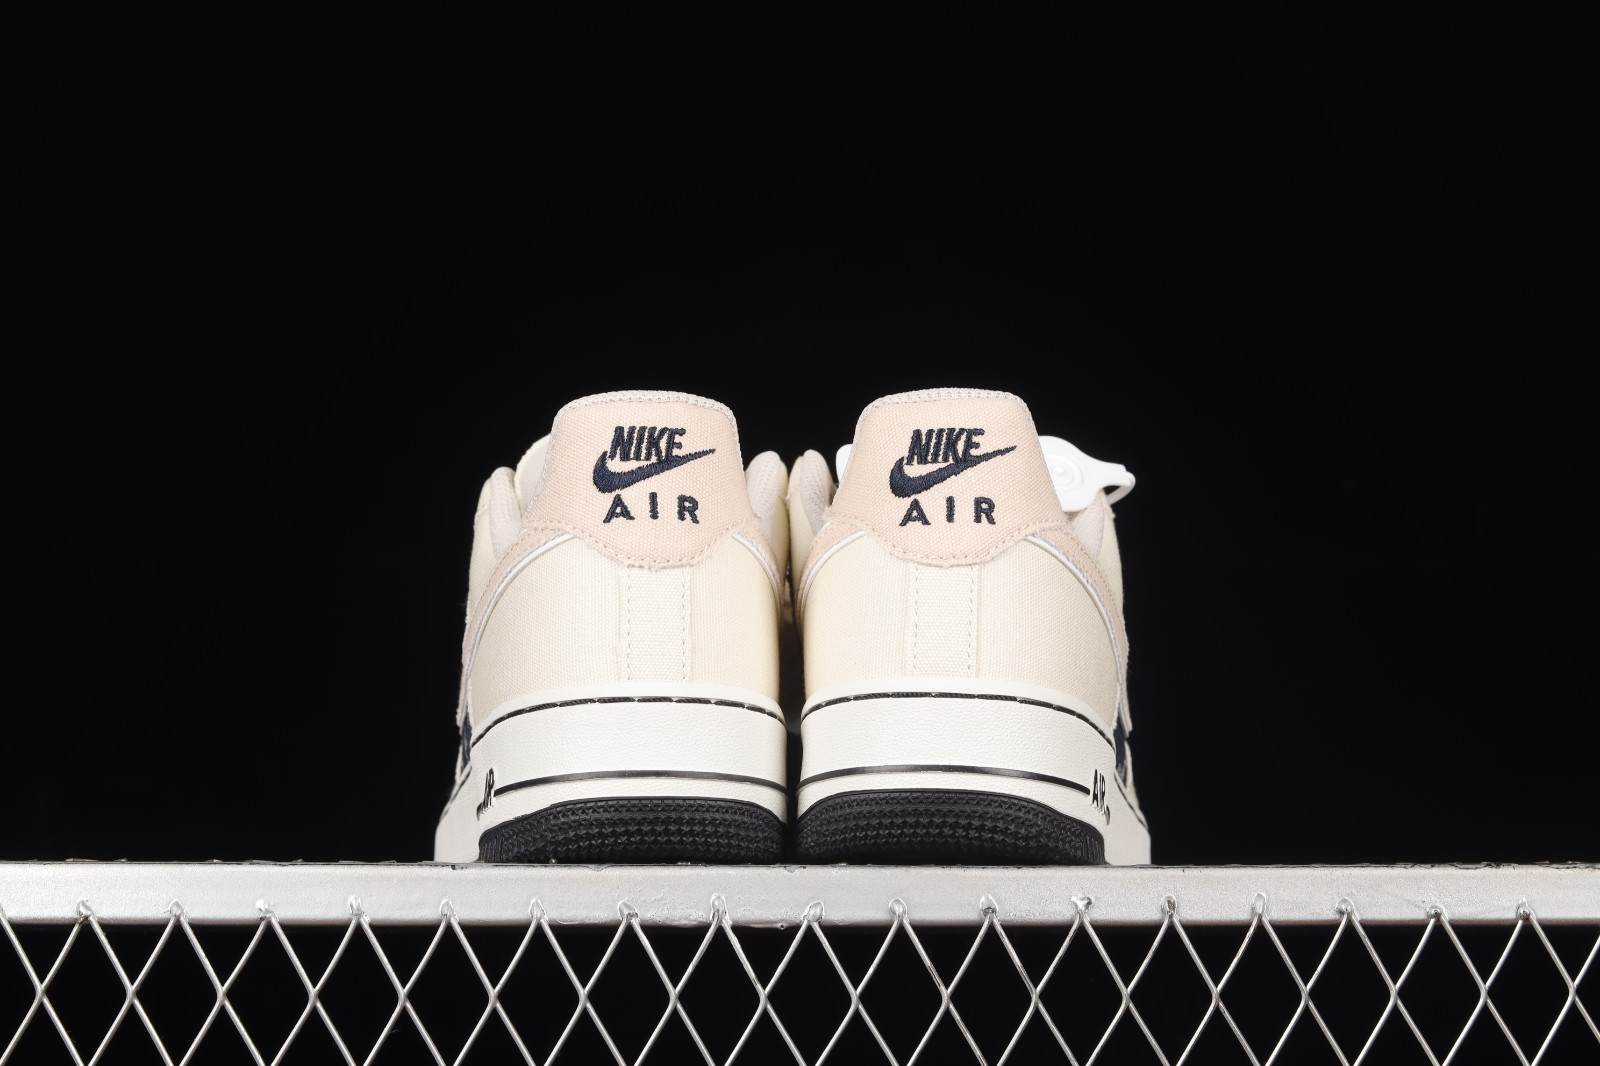  Nike Mens Air Force 1 Low 07 315122 111 White on White - Size  12 | Basketball